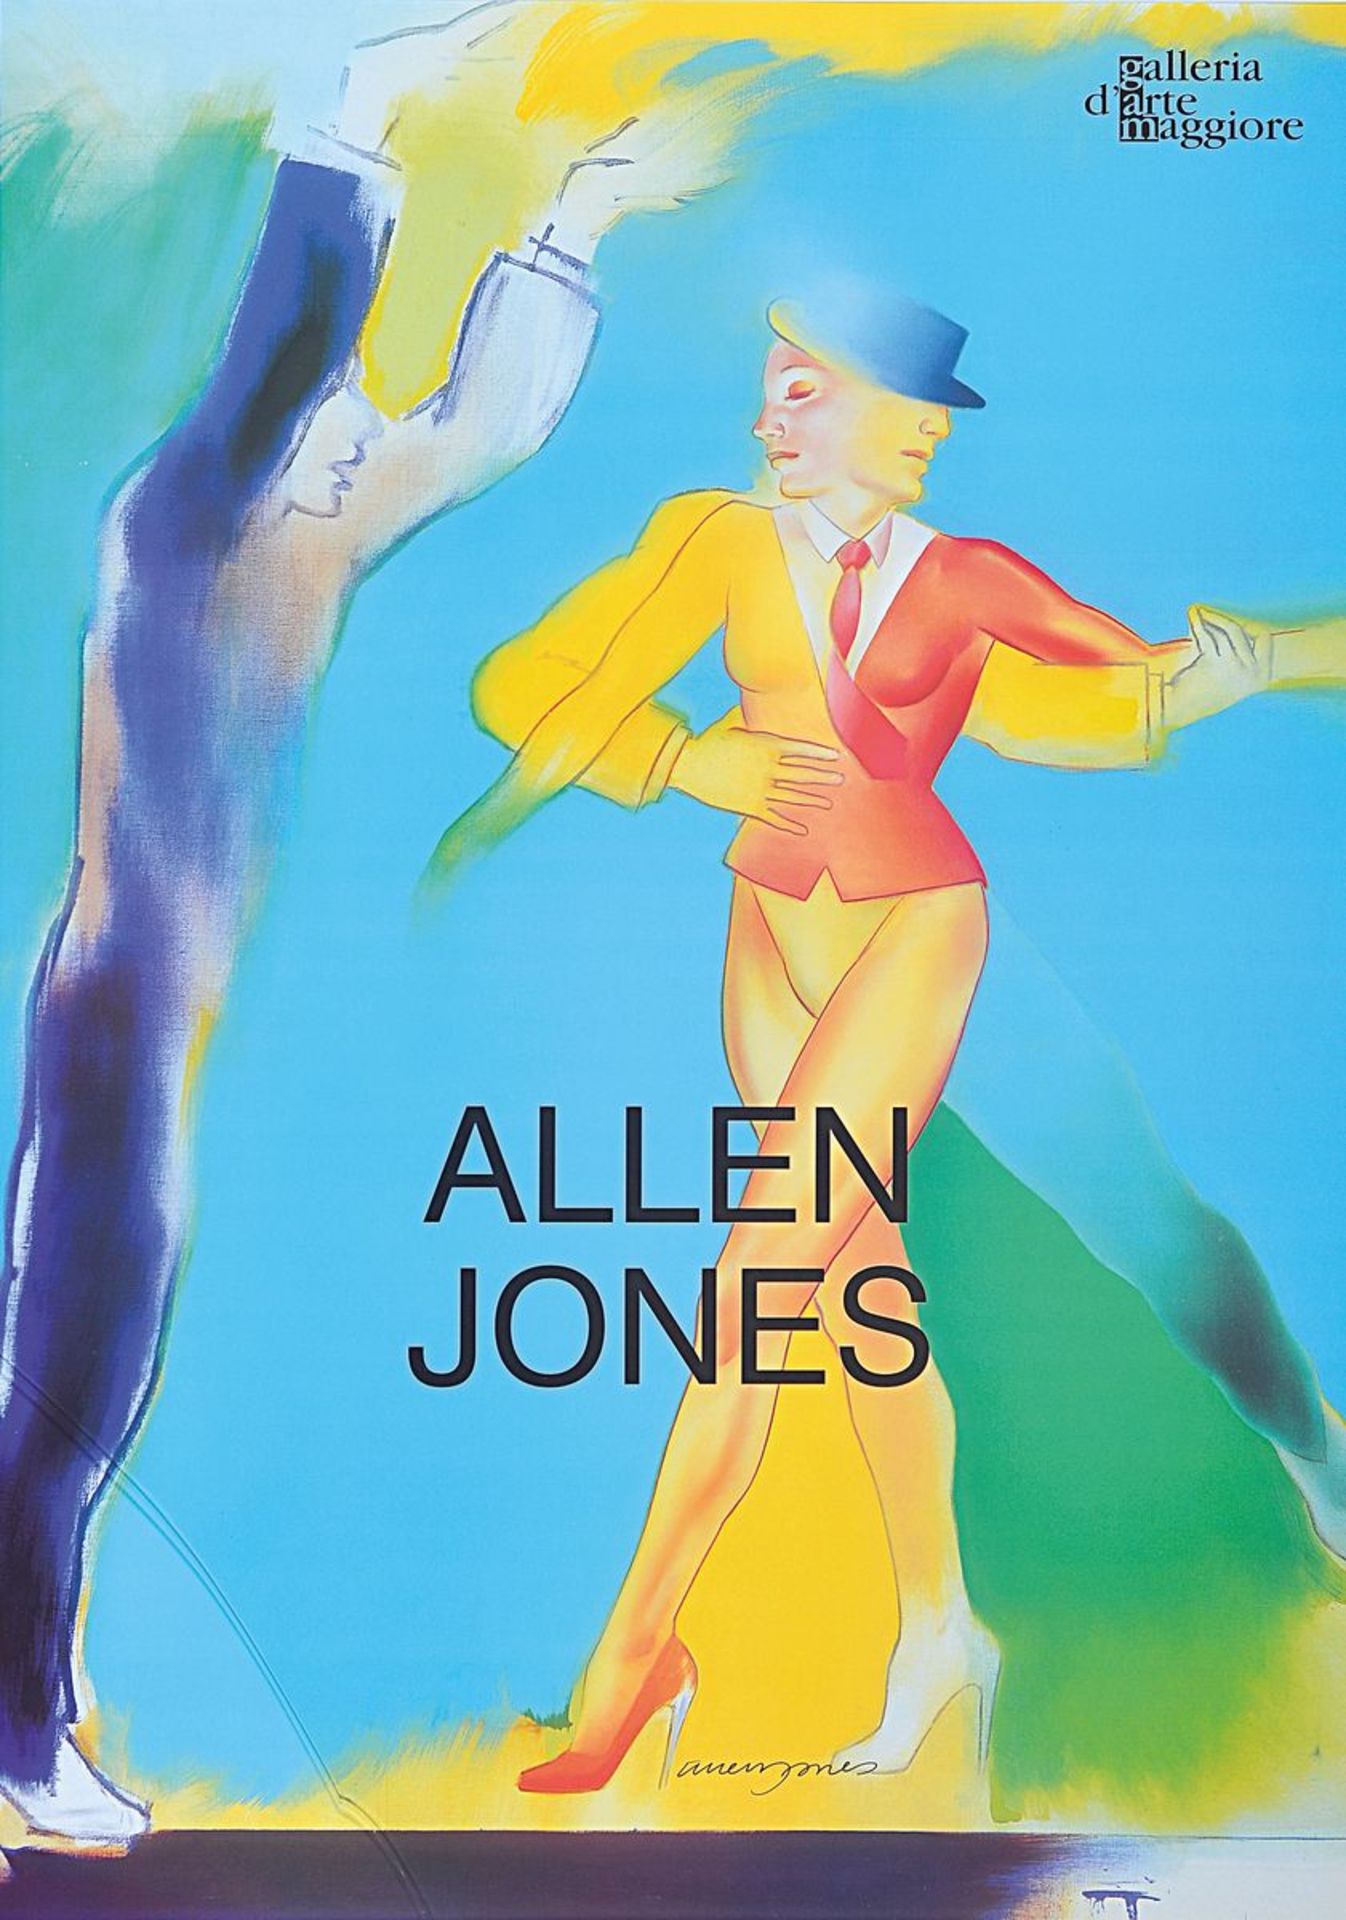 Allen Jones, née 1937, offset lithograph, signed by hand, only a few signed copies, ed. Galleria D #